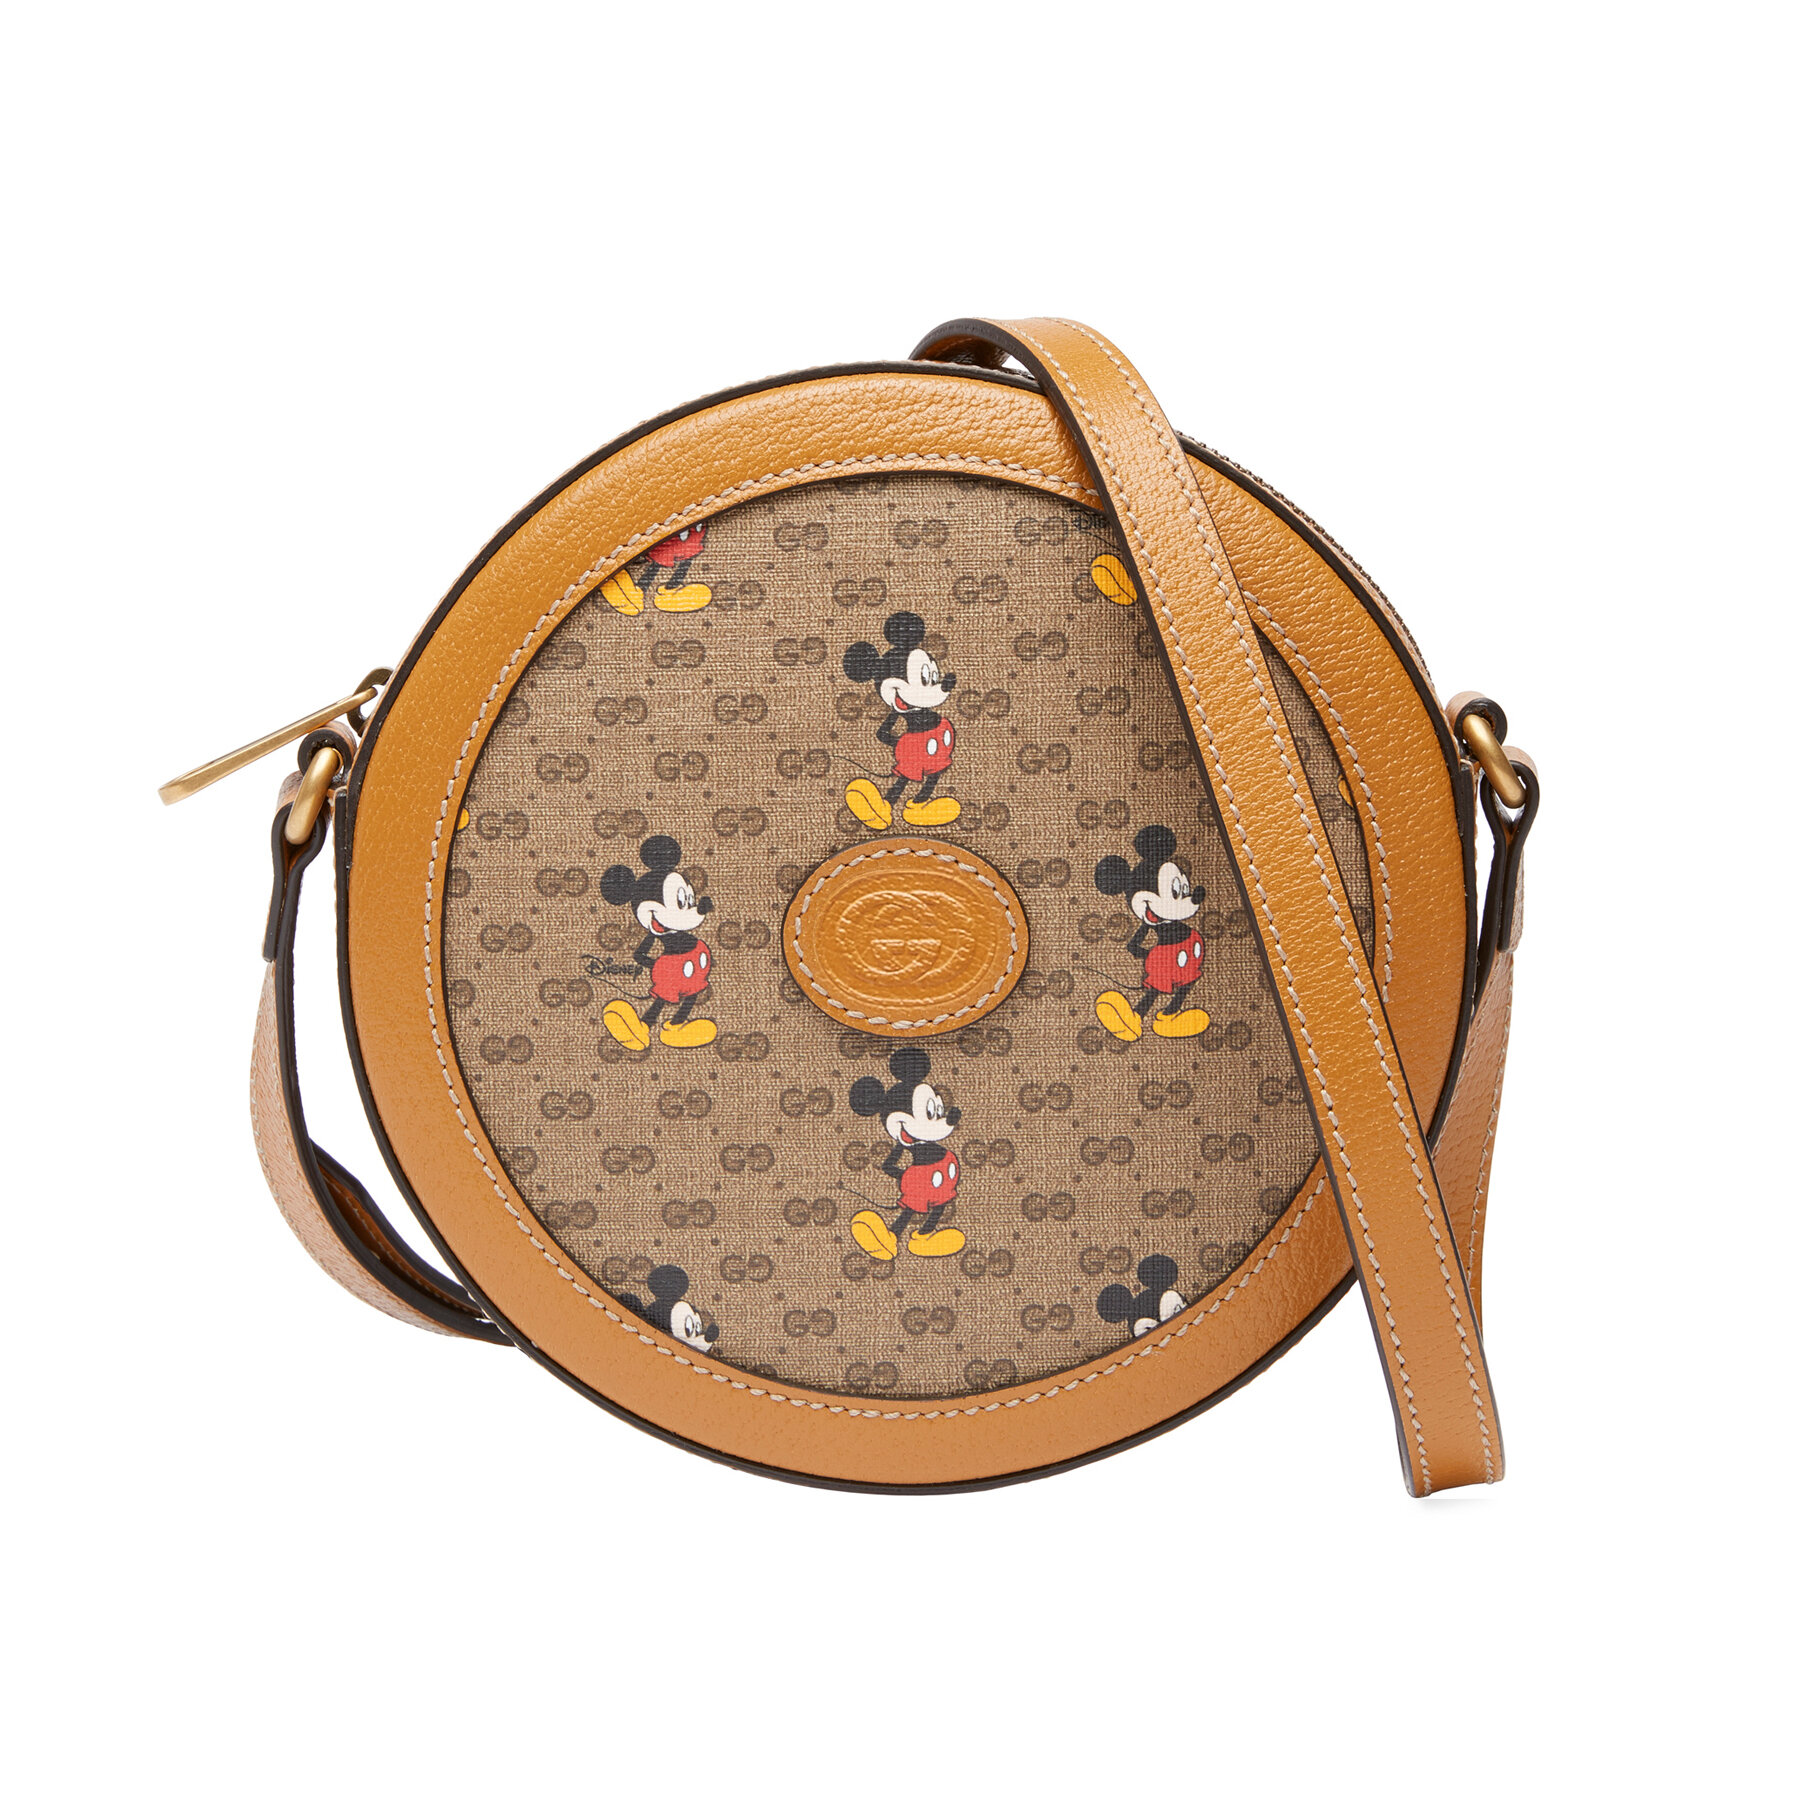 The Gucci x Disney Line Celebrates The Year Of The Mouse With The Studio's  Icon